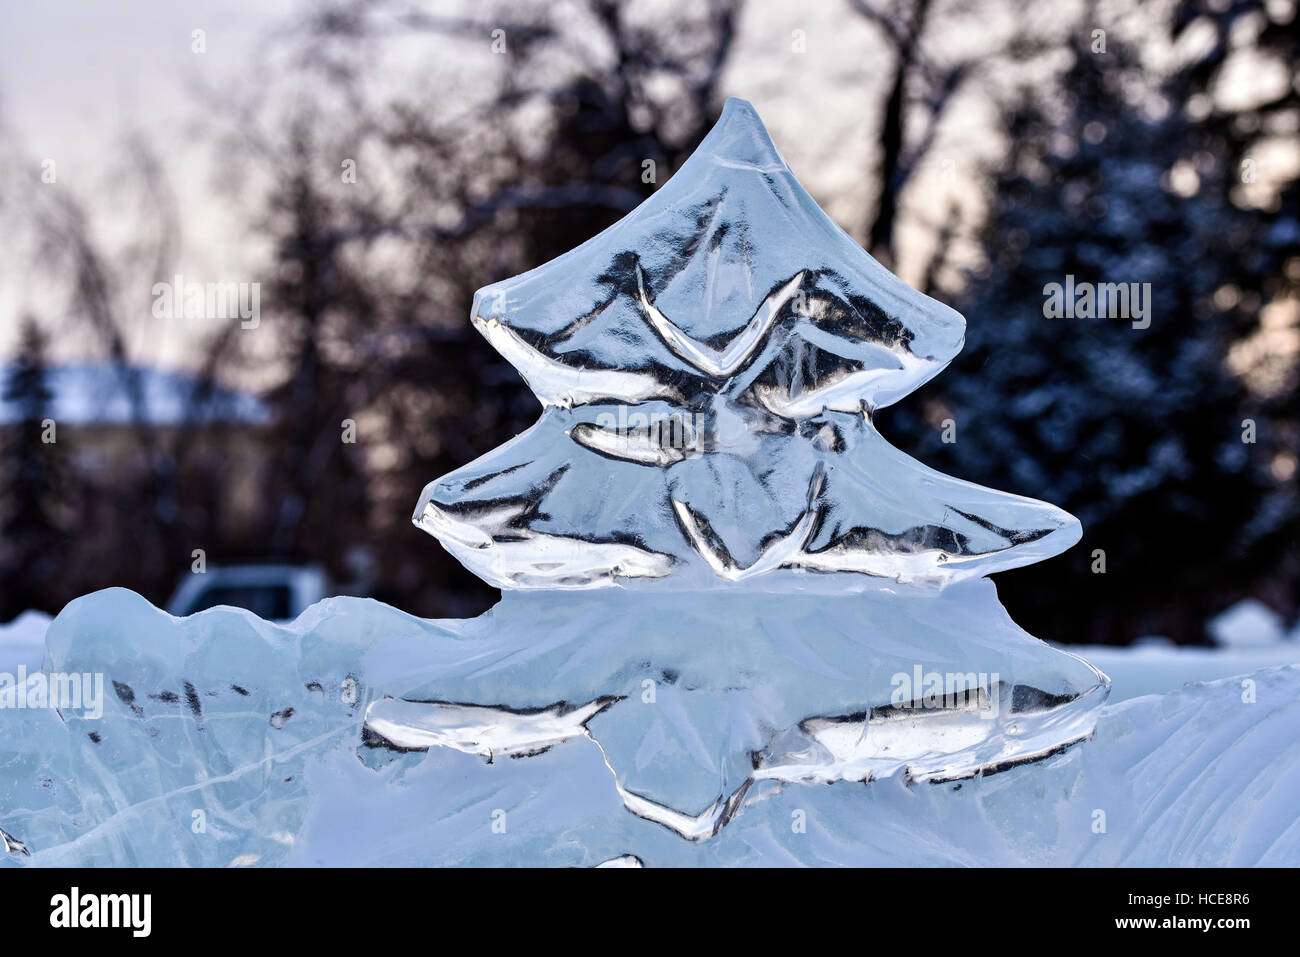 Icy Christmas tree, sculpture, carved from a piece of ice Stock Photo